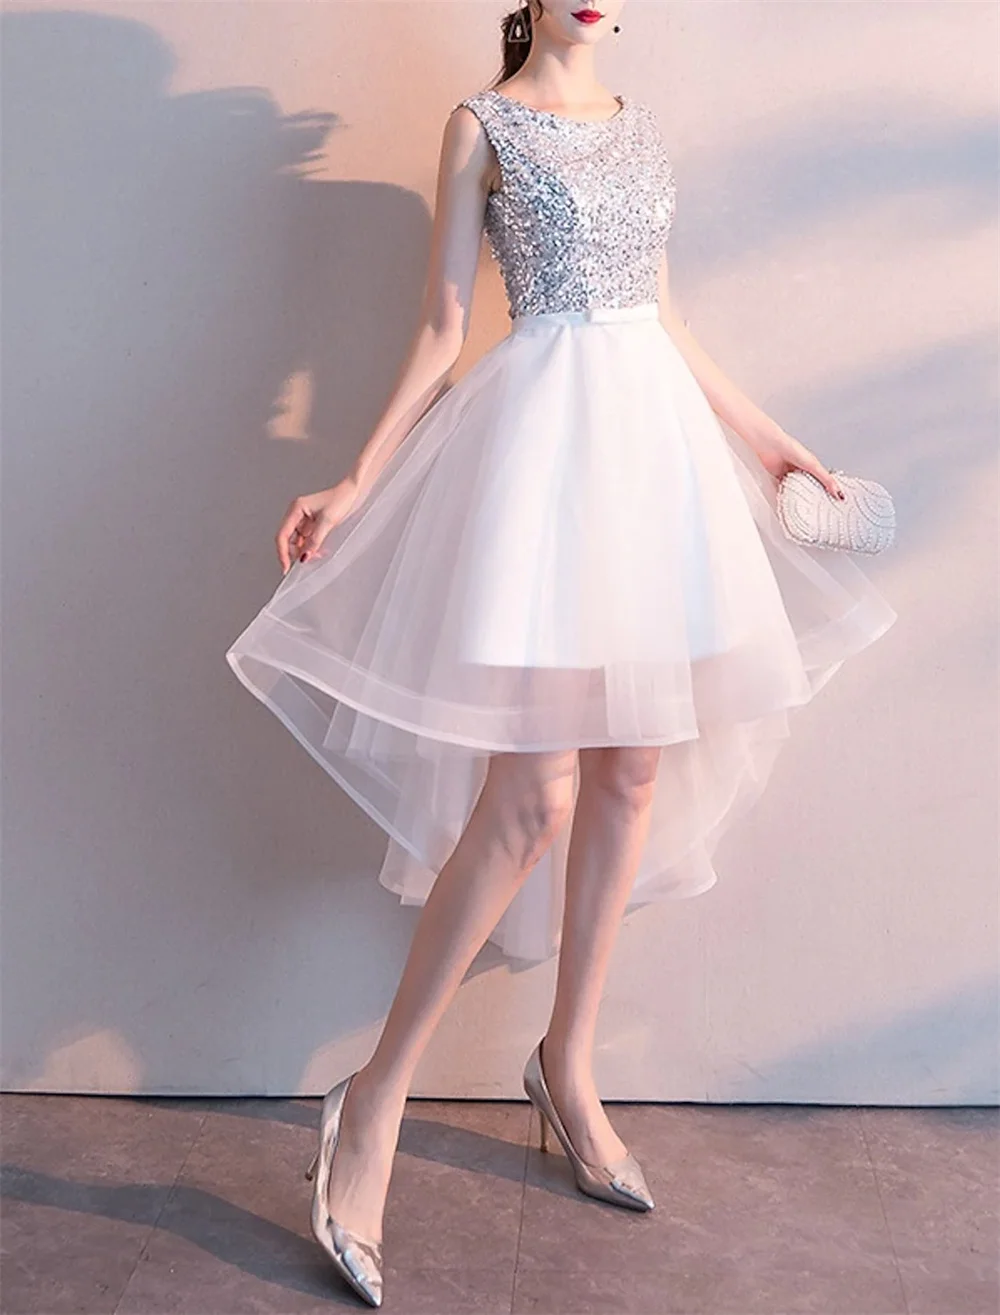 

Luxury Gowns Bridesmaid Dress Jewel Neck Sleeveless Sparkle Shine Asymmetrical Sequined with Sash Ribbon Bow Sequin 2022